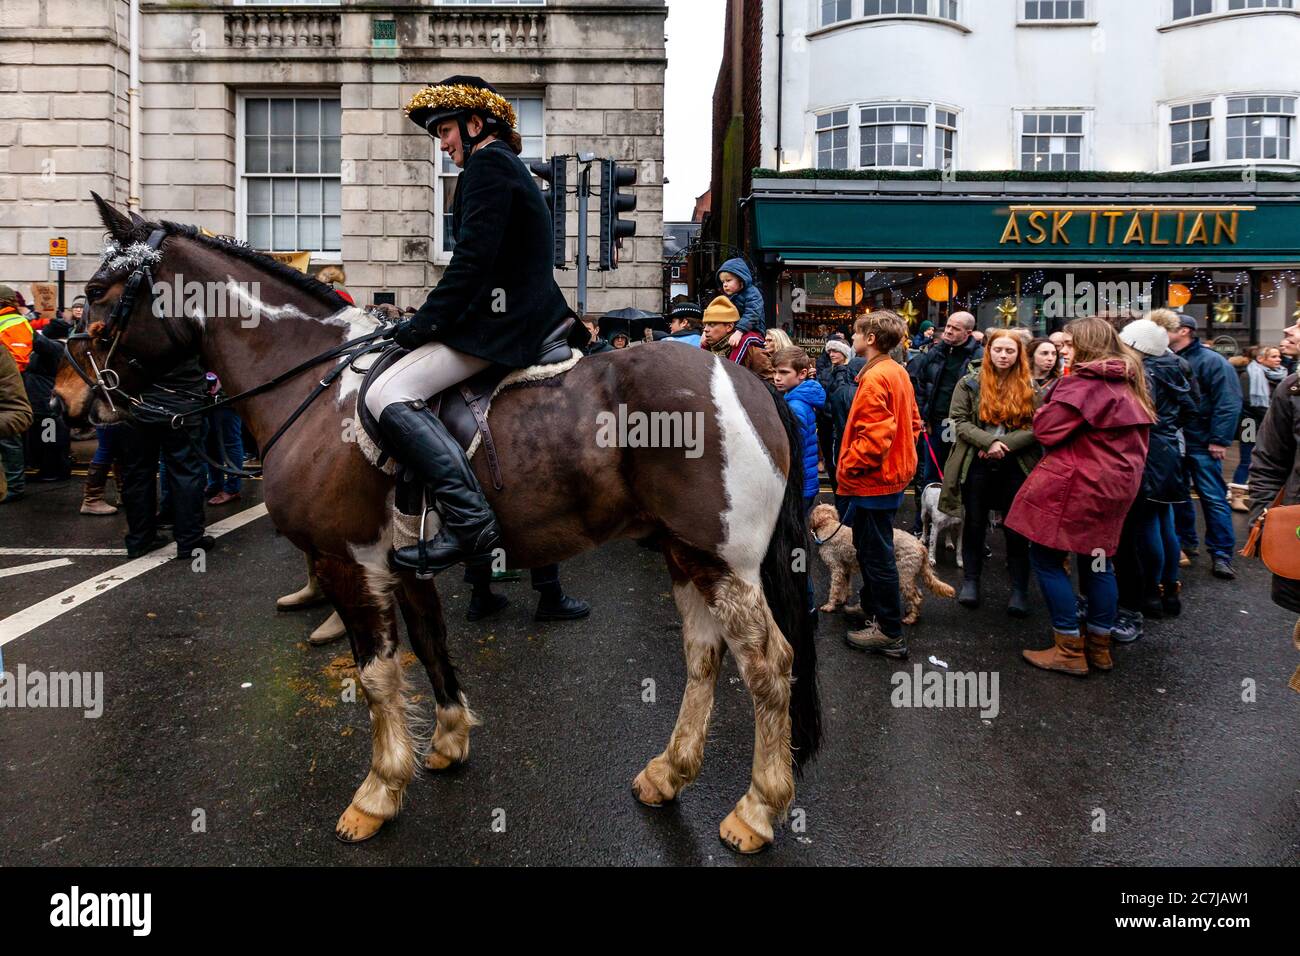 Members of The Southdown and Eridge Hunt In Lewes High Street For Their Annual Boxing Day Meeting, Lewes, East Sussex, UK Stock Photo